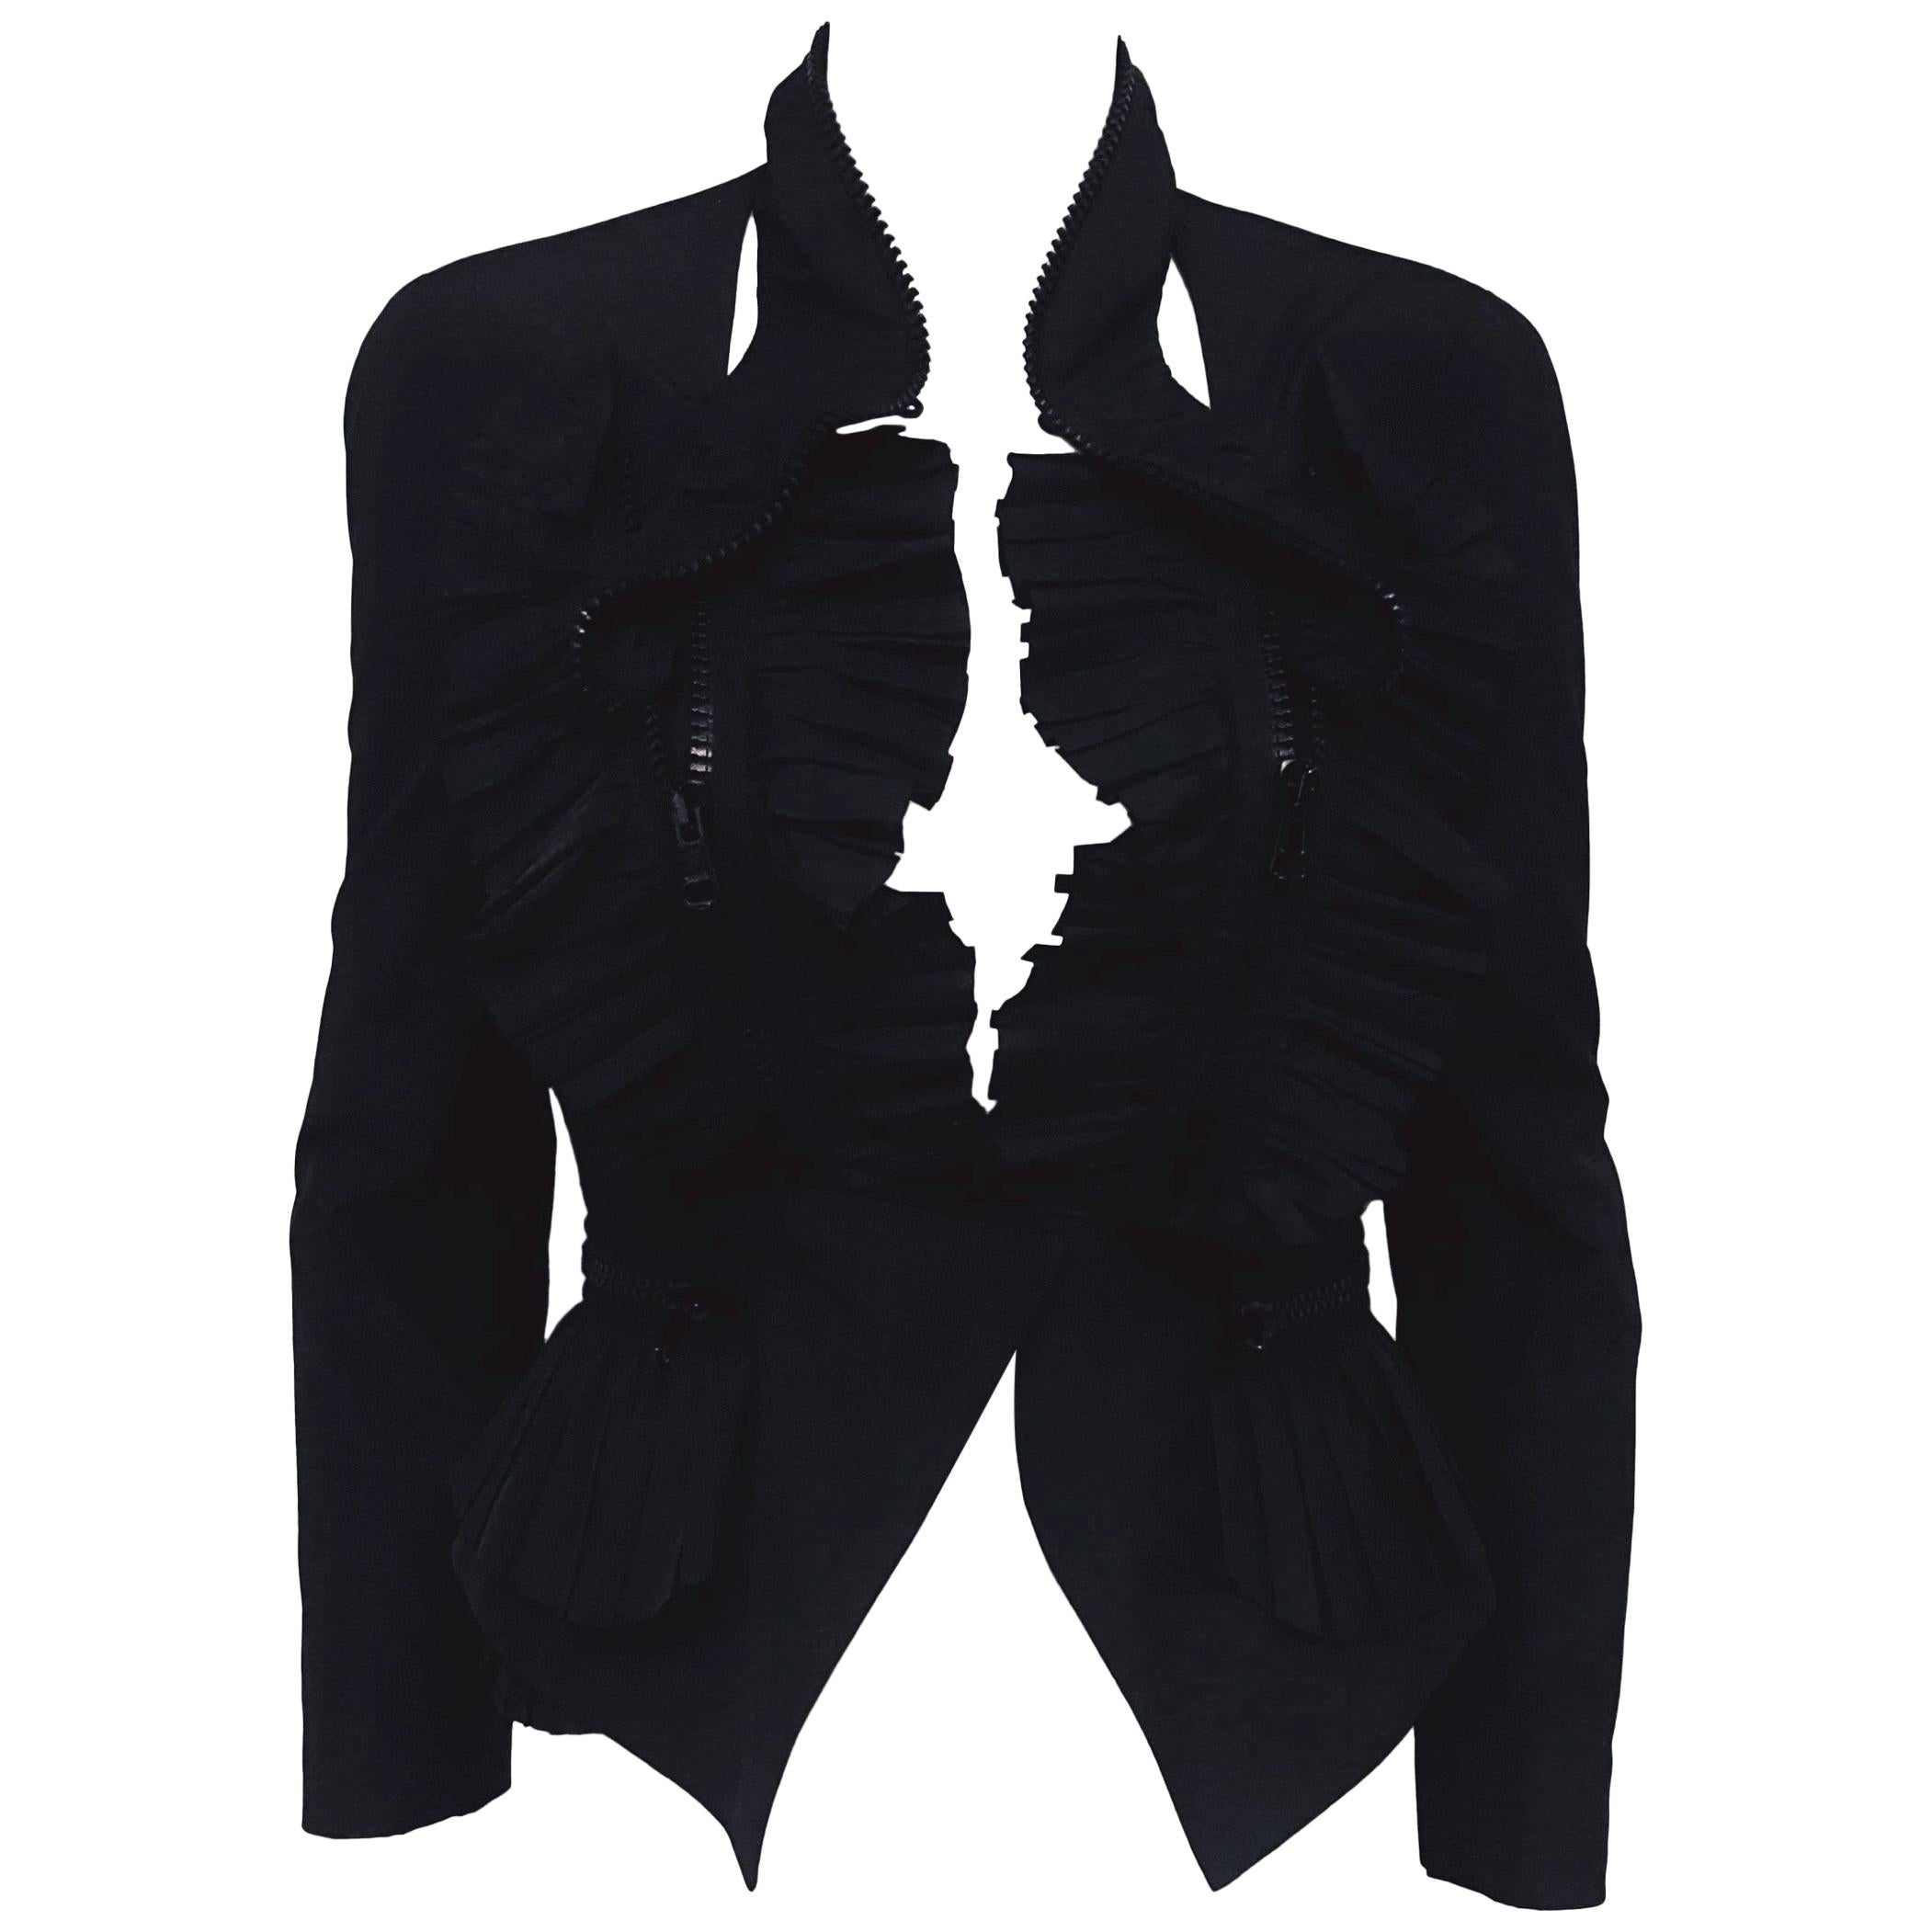 Givenchy Black Pleated Jacket with Multiple Zippers at Waist / Collar / Front